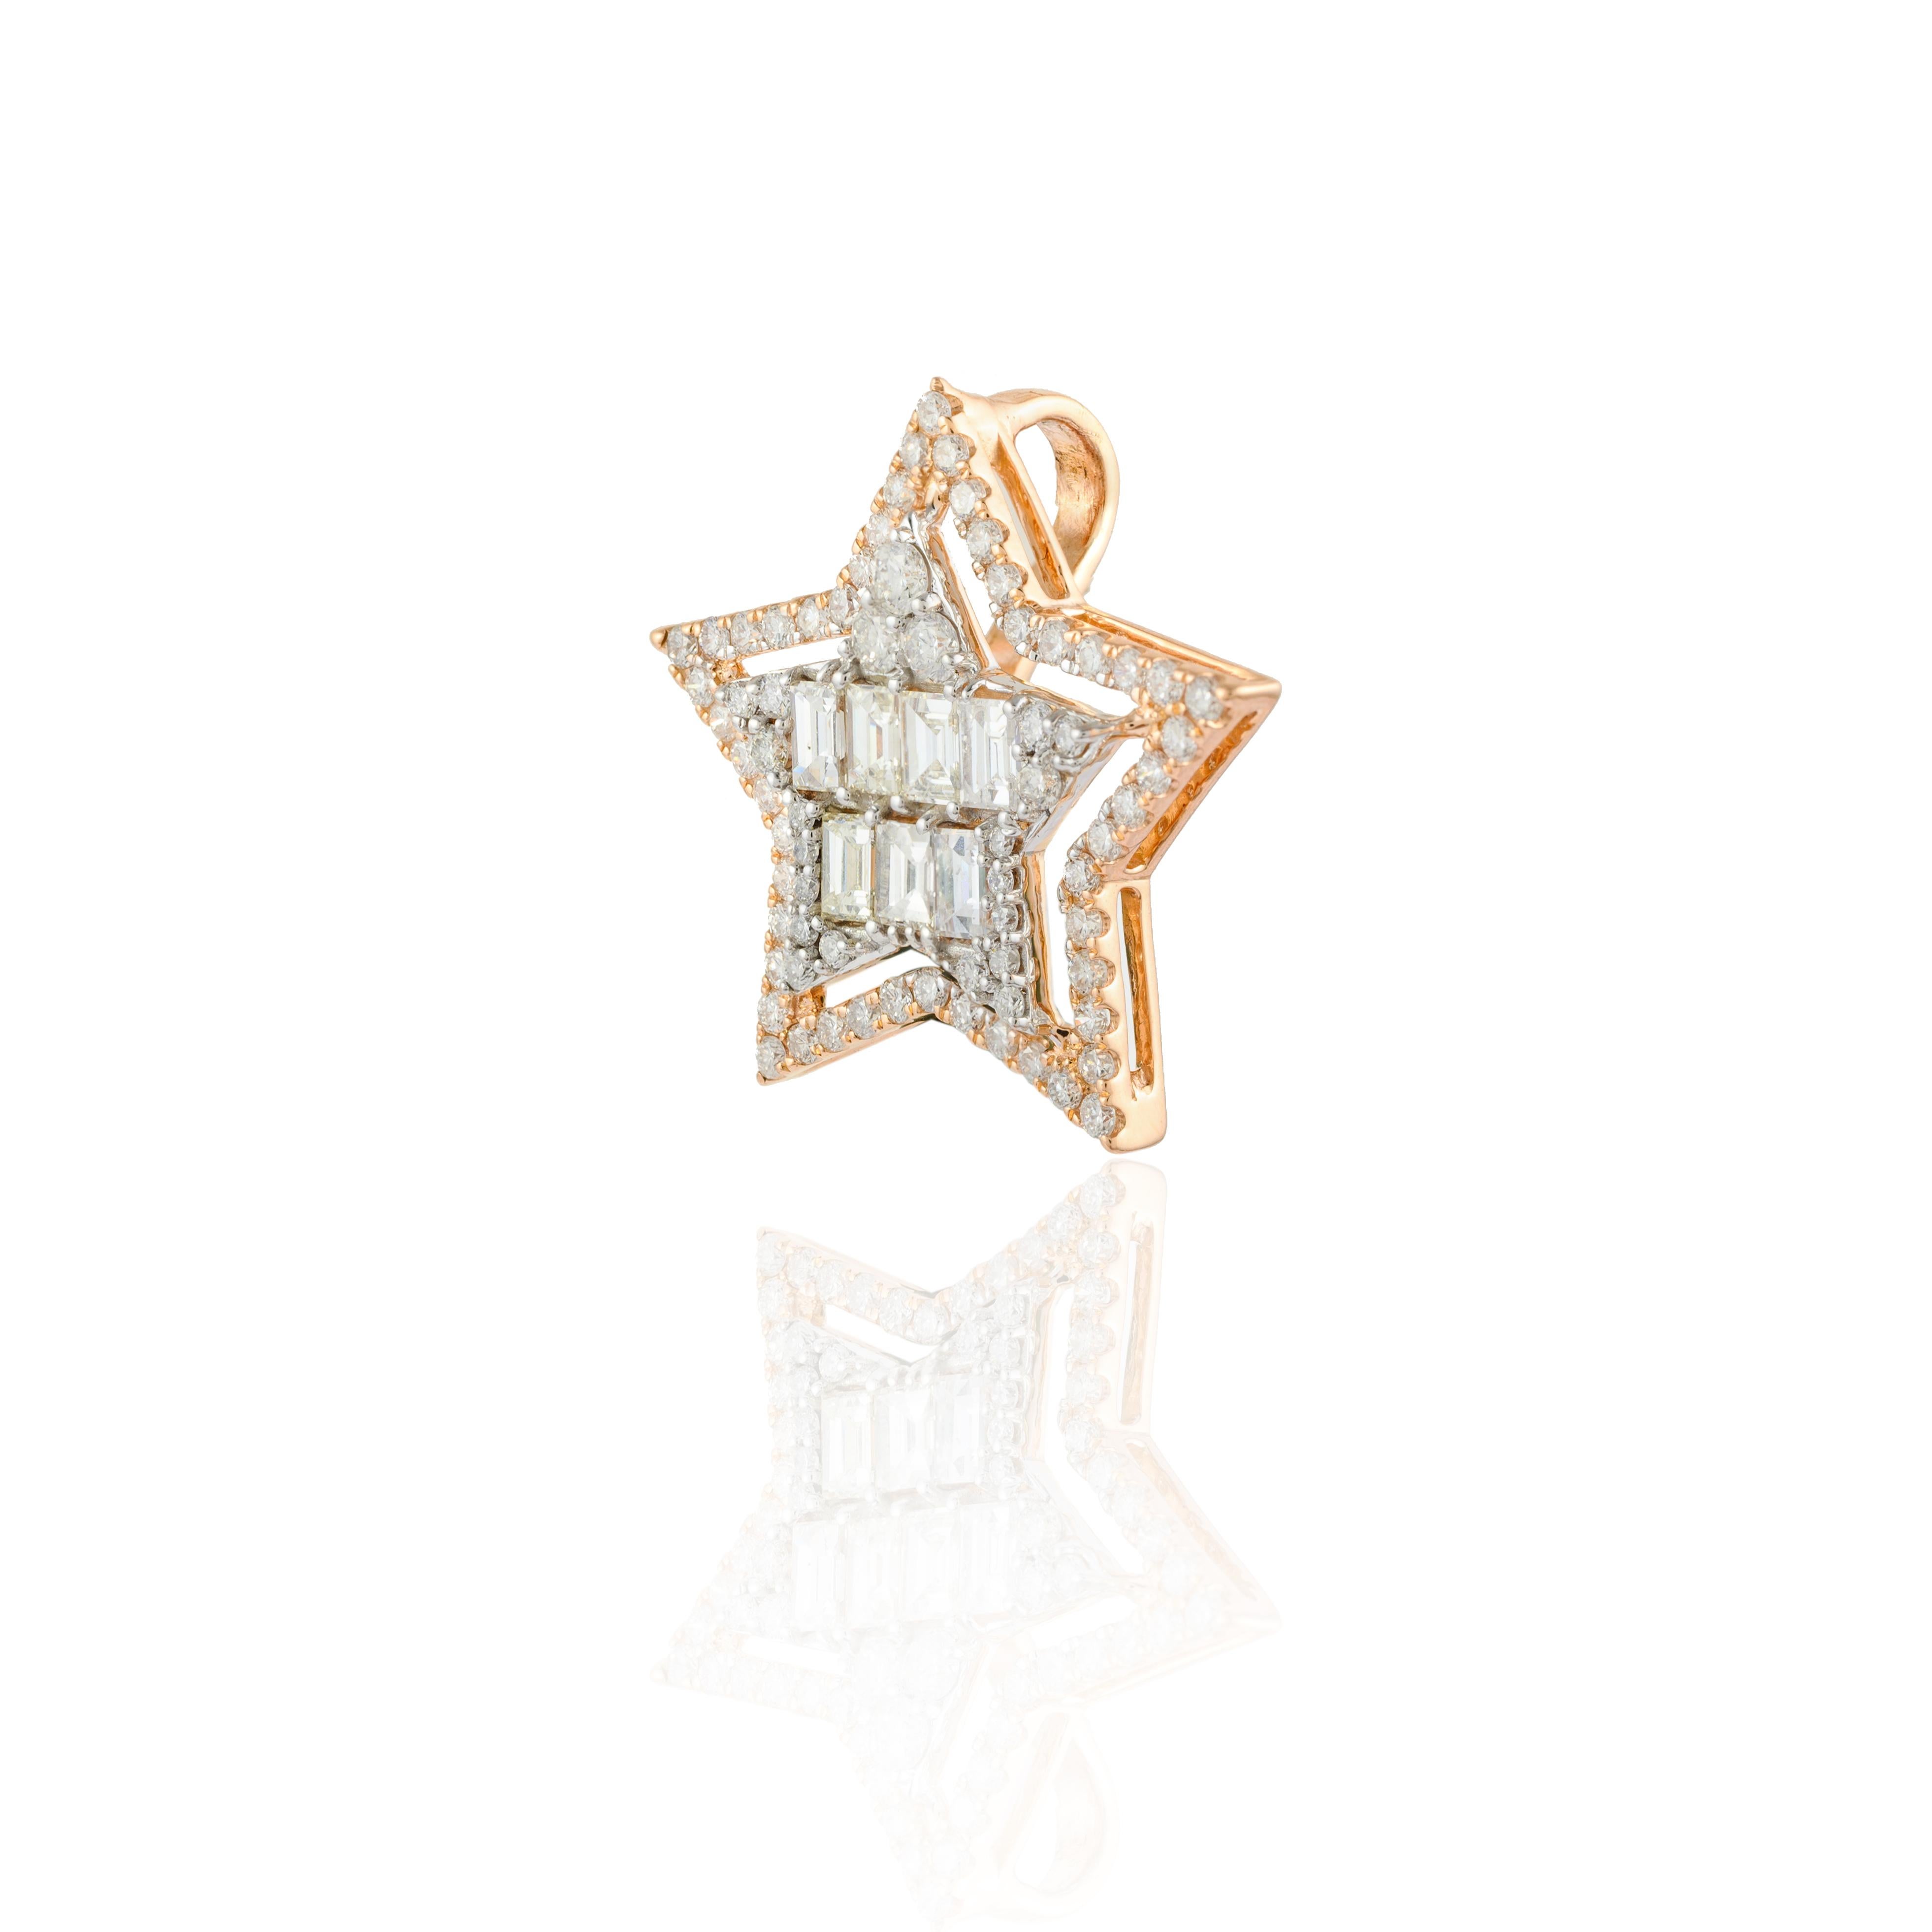 Diamond Star Pendant in 18K Gold with diamond studded in star shape gold.. This stunning piece of jewelry instantly elevates a casual look or dressy outfit. 
April birthstone diamond brings love, fame, success and prosperity.
Designed with mix cut